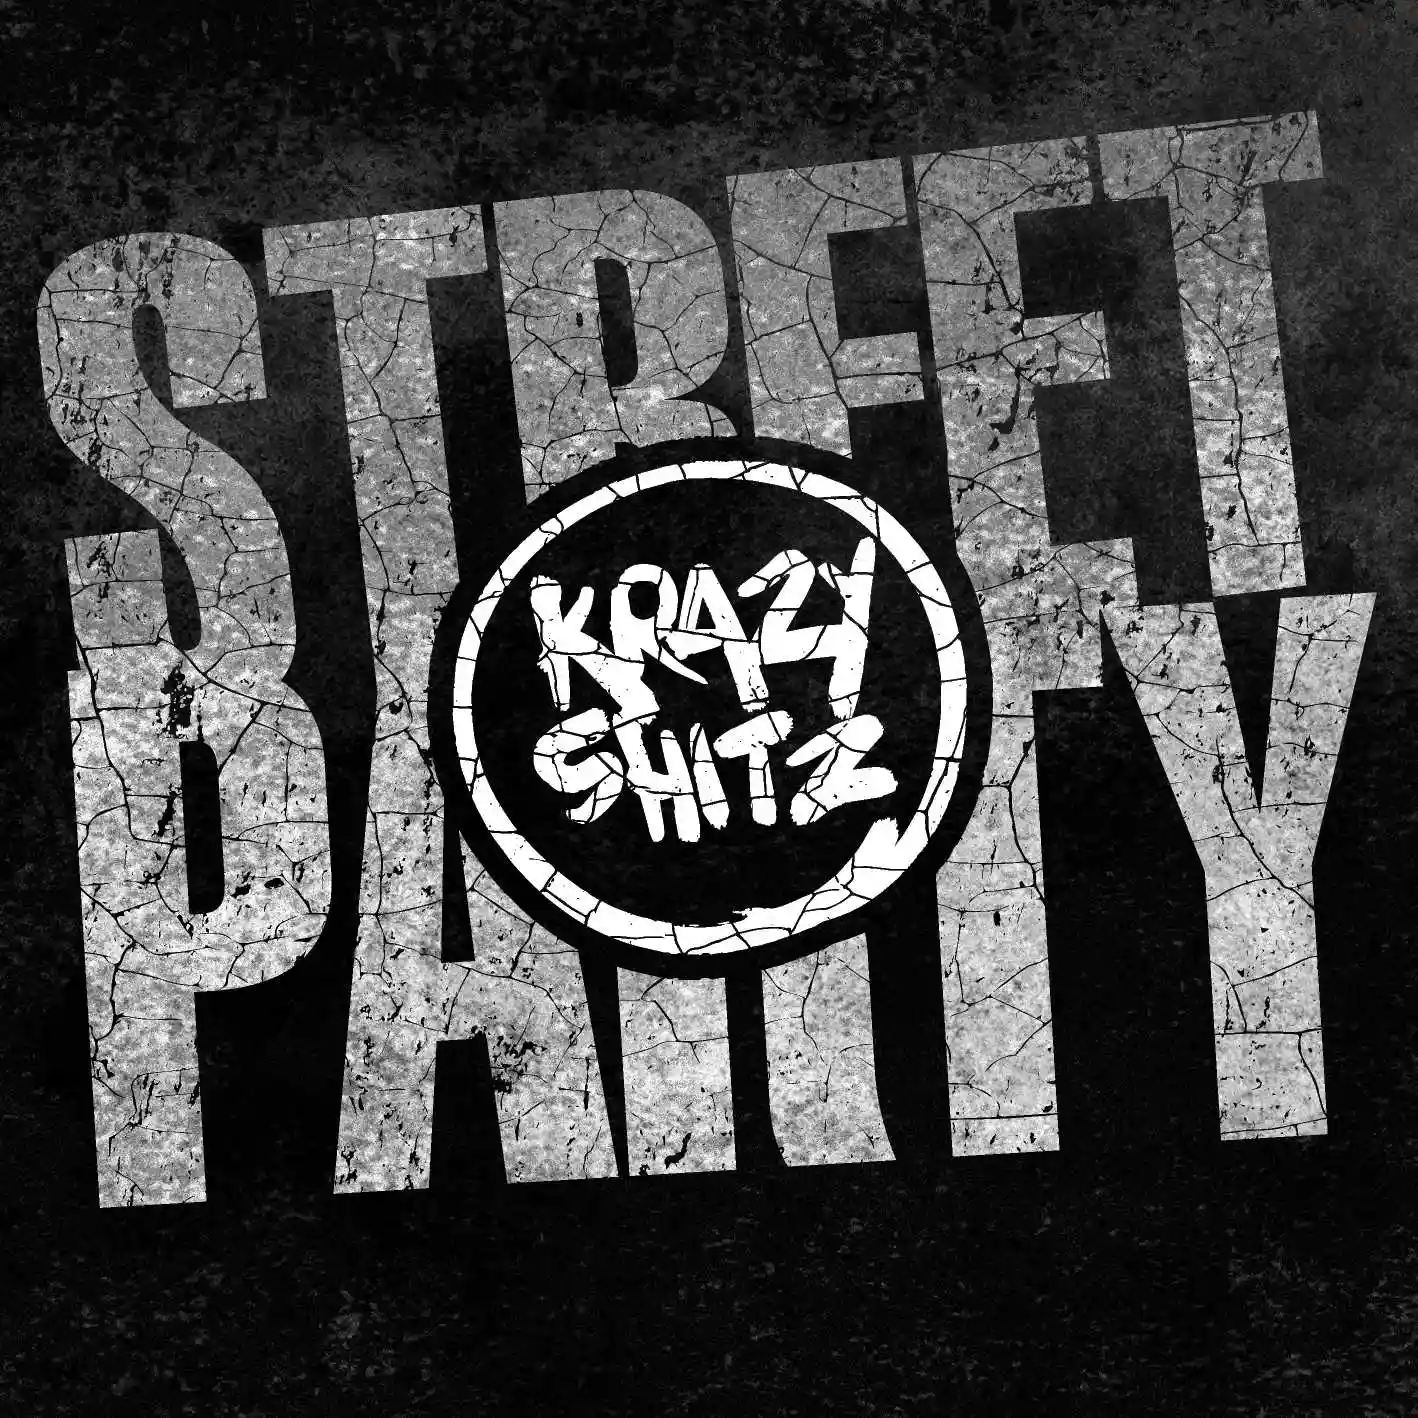 Album cover for “Street Party” by Krazy Shitz